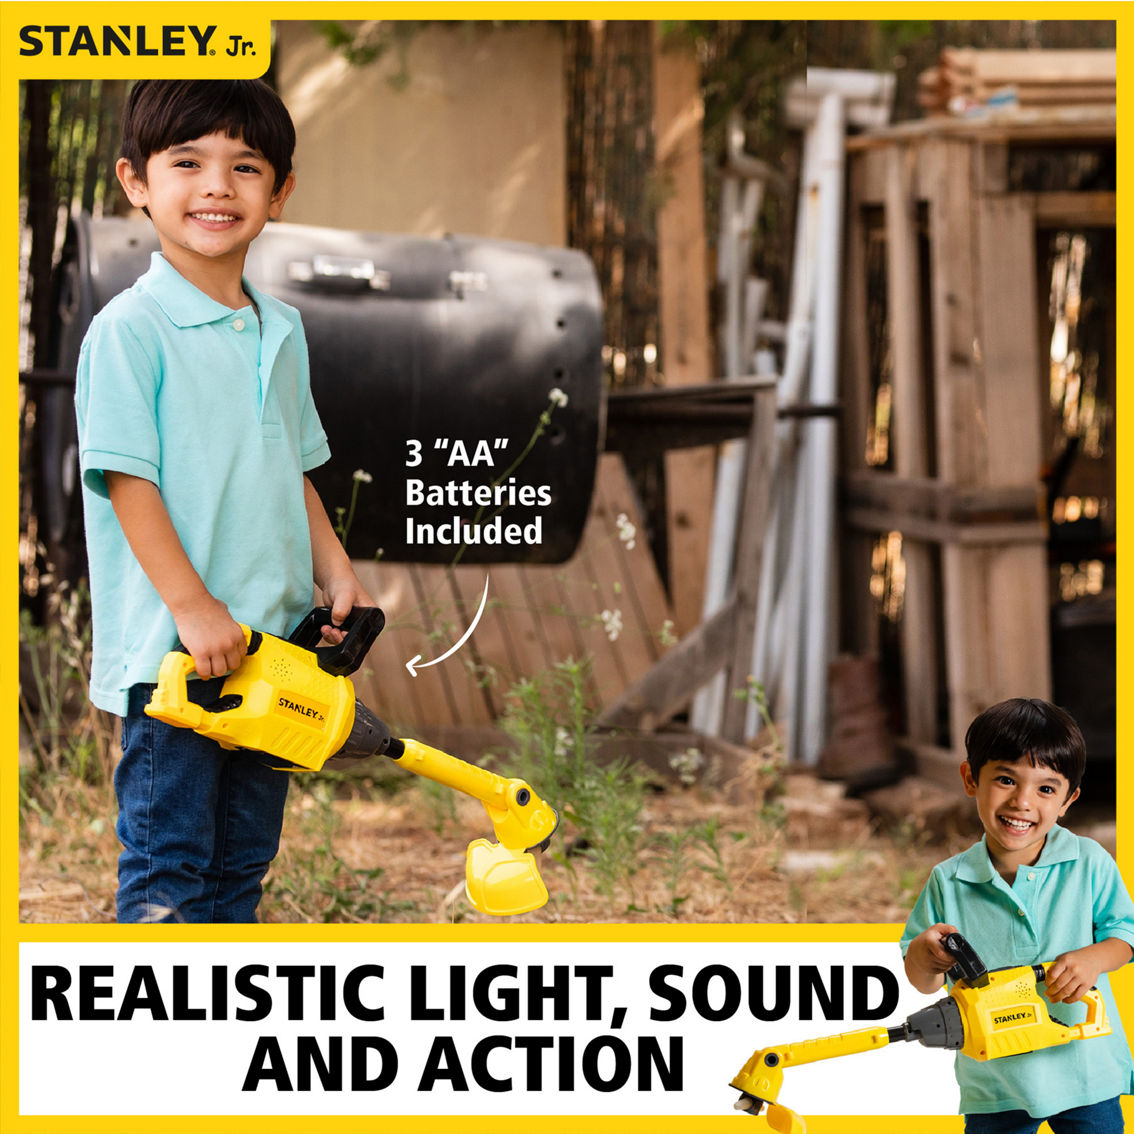 ​Stanley Jr. Battery Operated Toy Weed Trimmer - Image 3 of 5